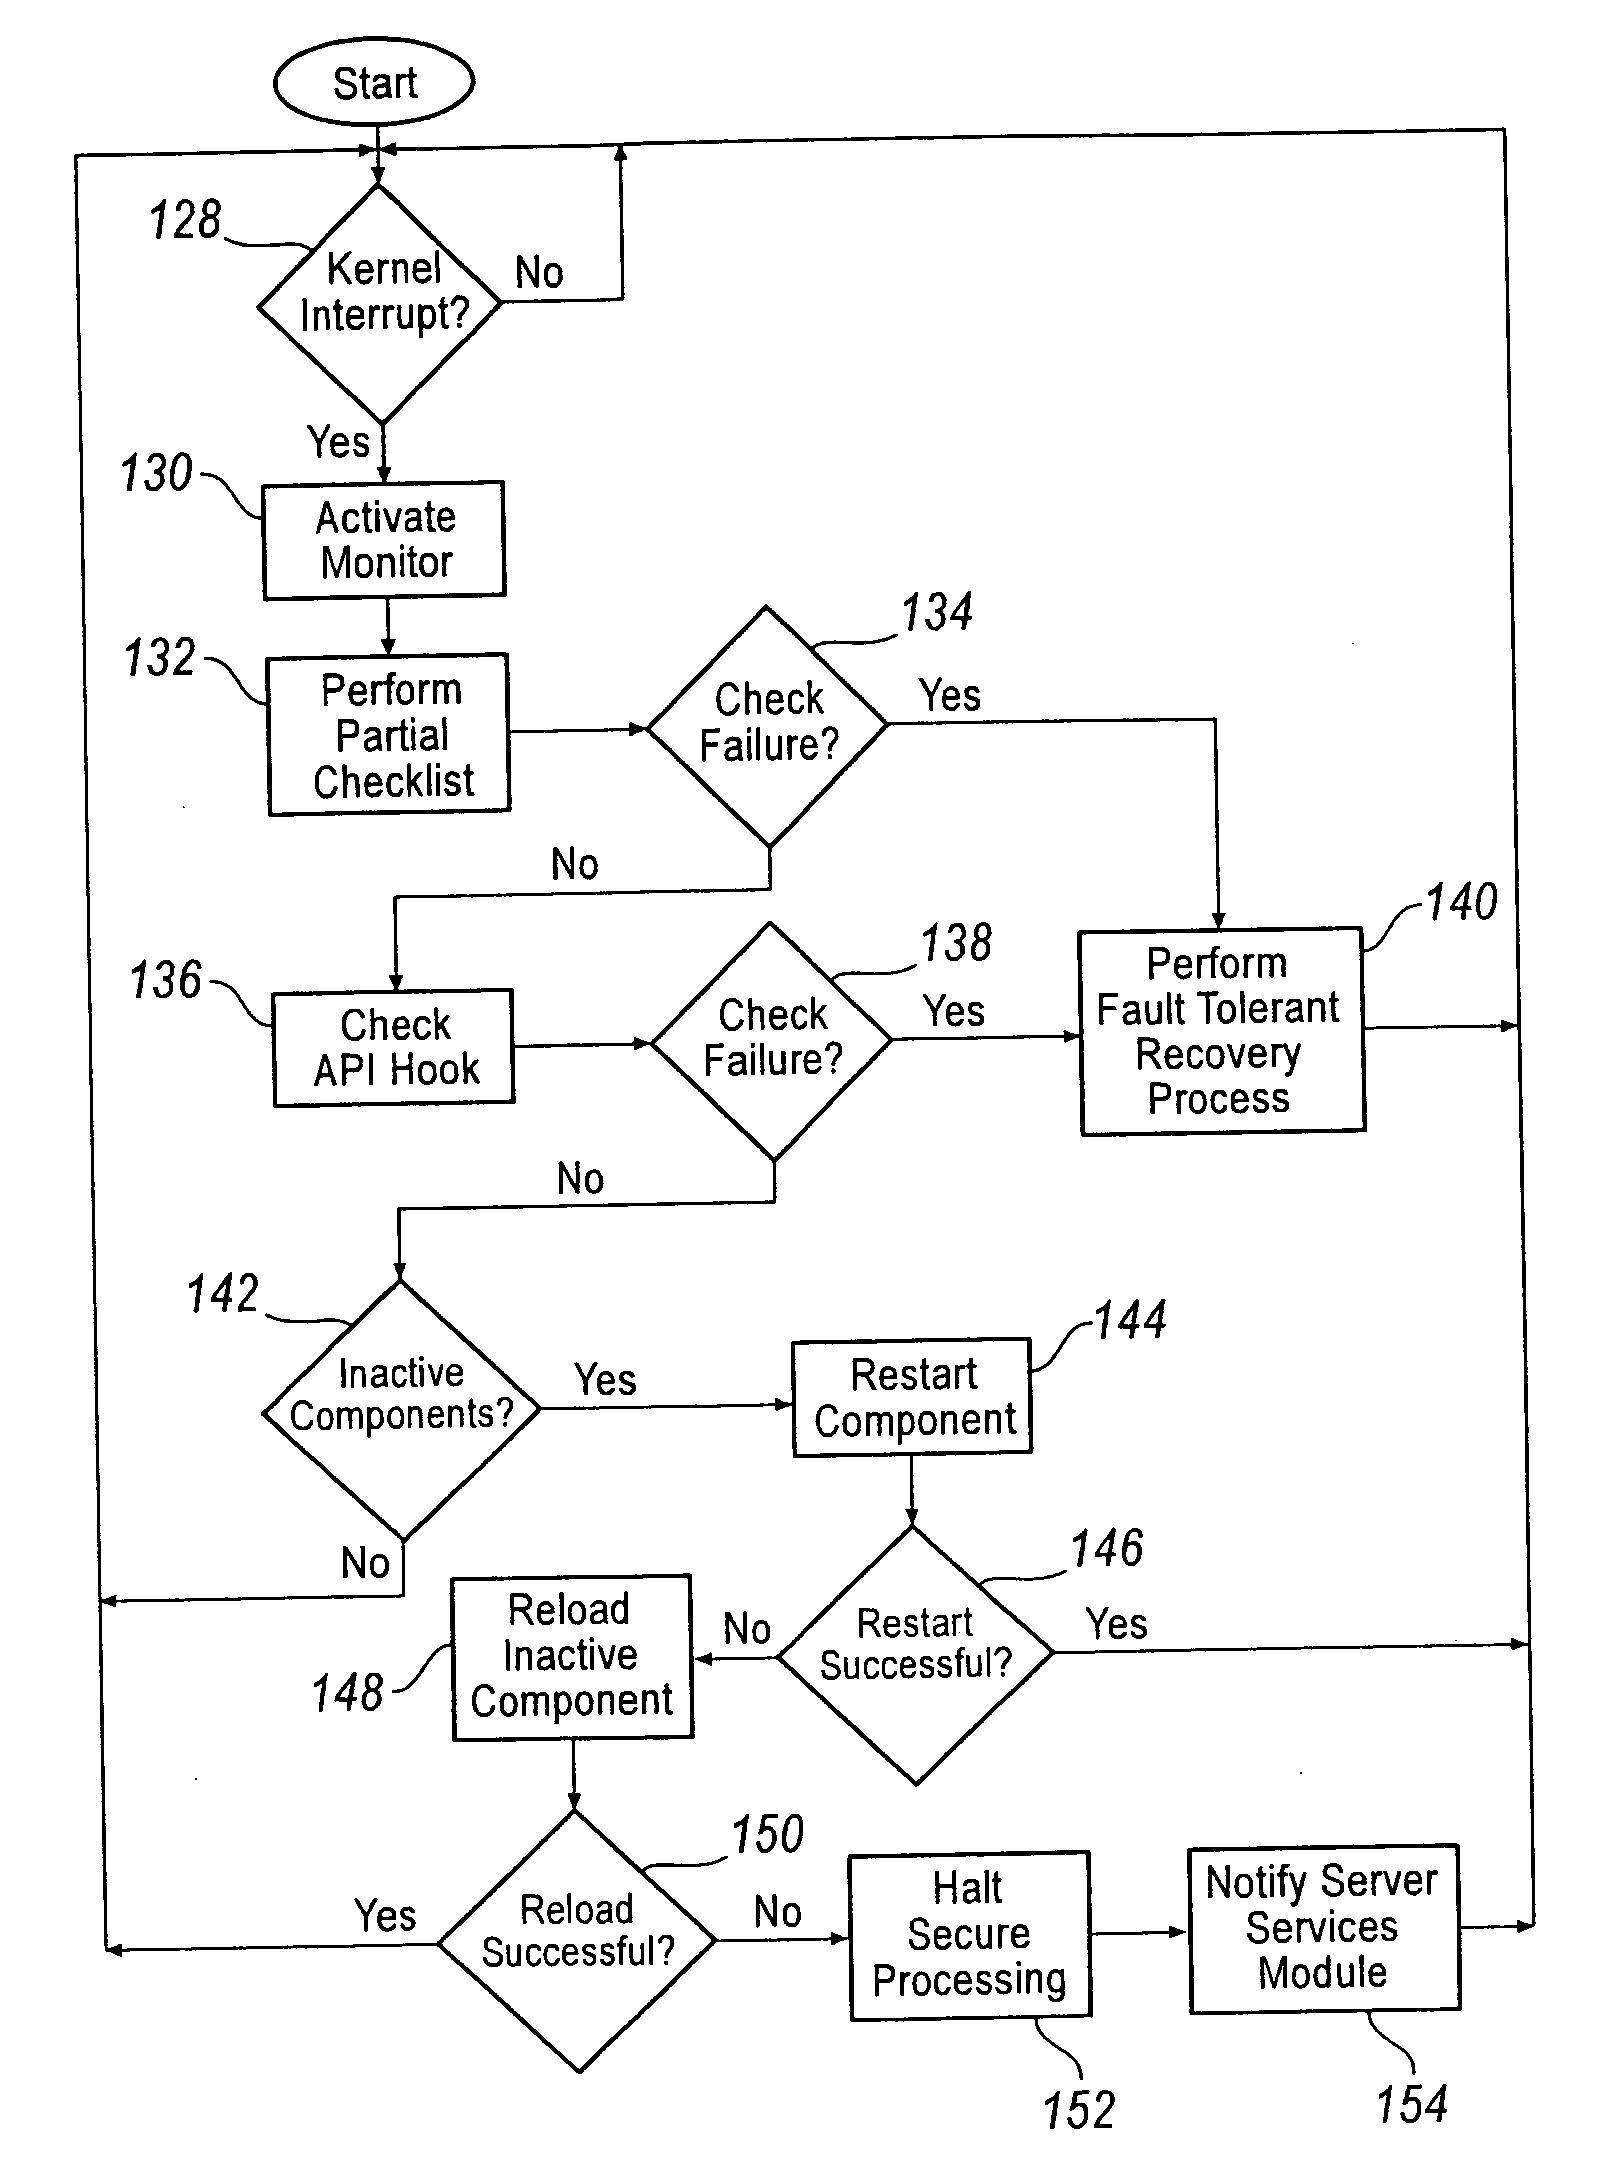 Secure flow control for a data flow in a computer and data flow in a computer network